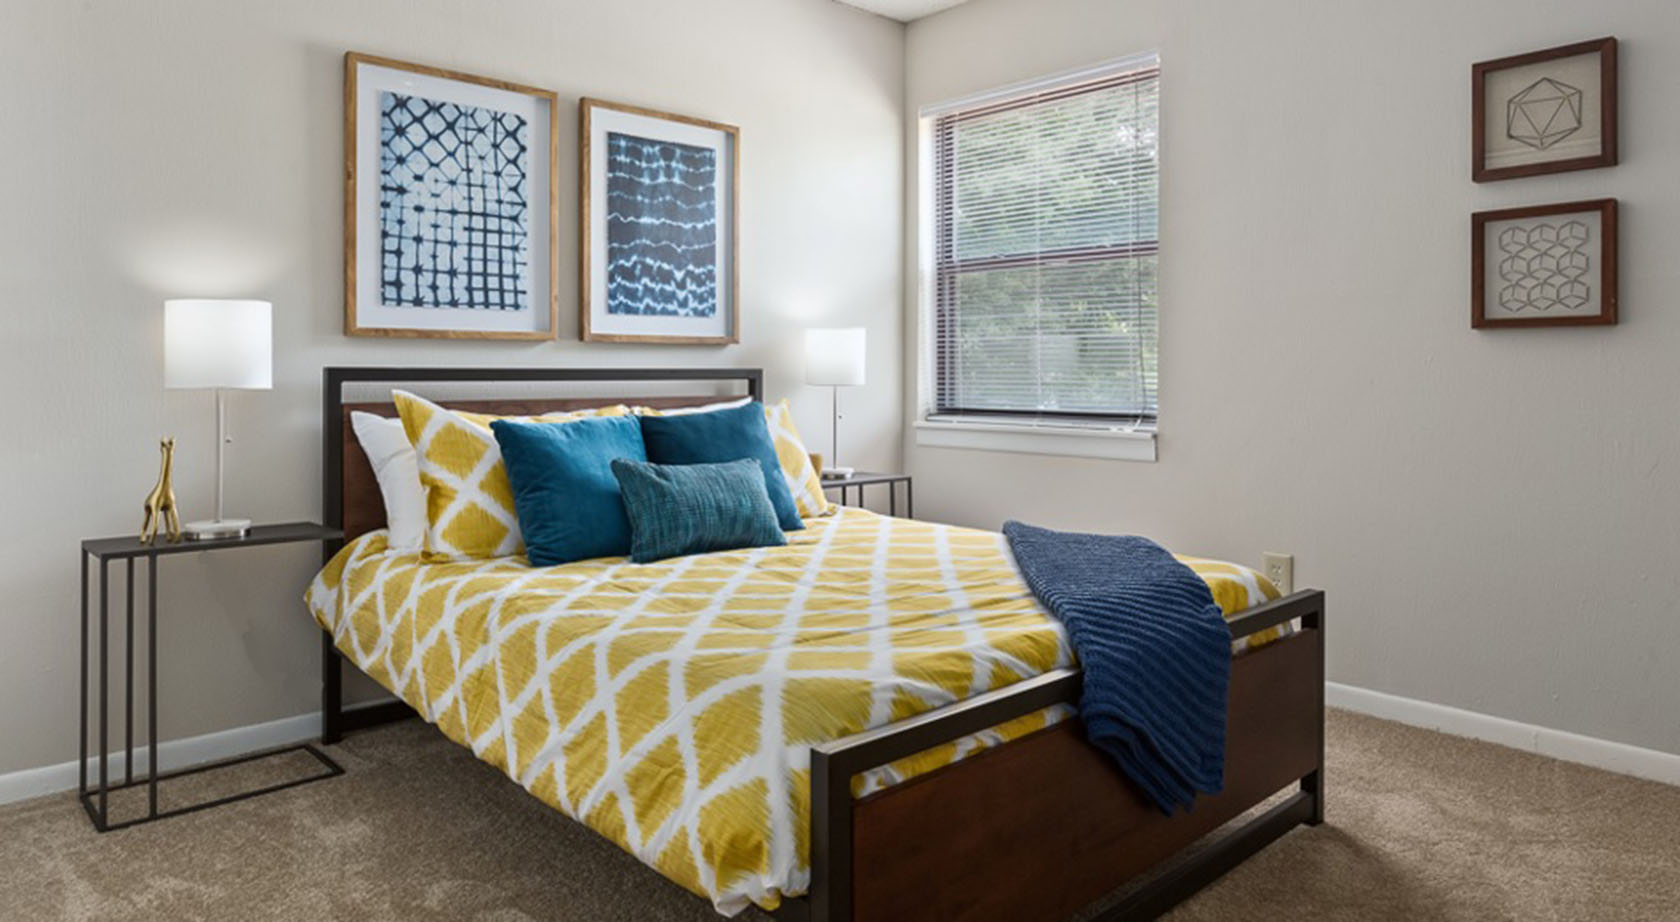 A bed with yellow bedding and blue blanket at Edgewater Village Apartments in Greensboro, NC